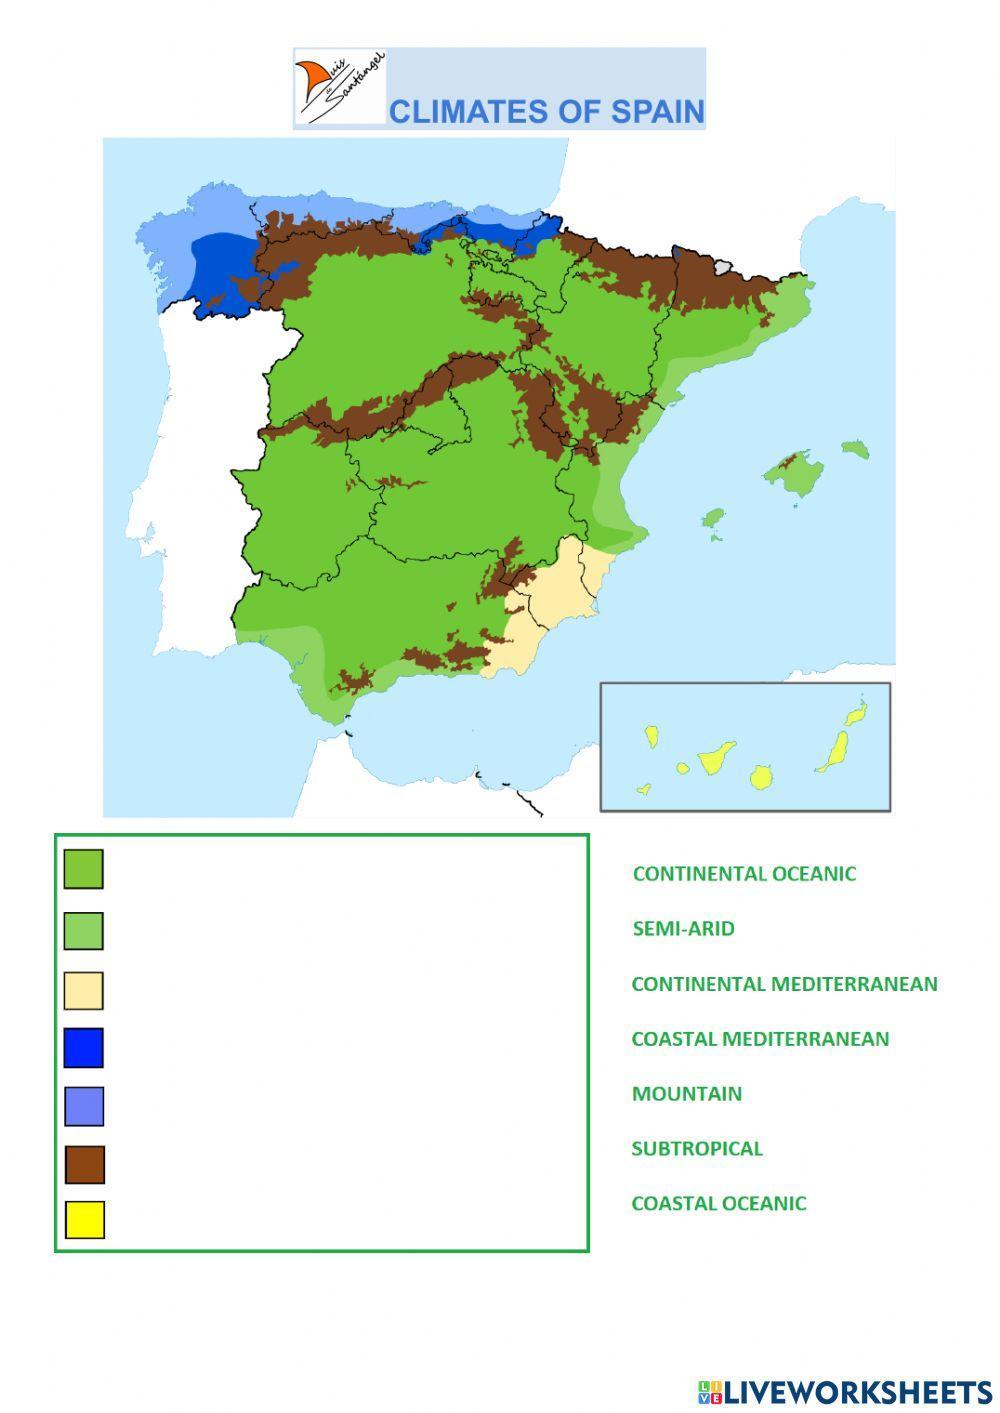 Climates of spain